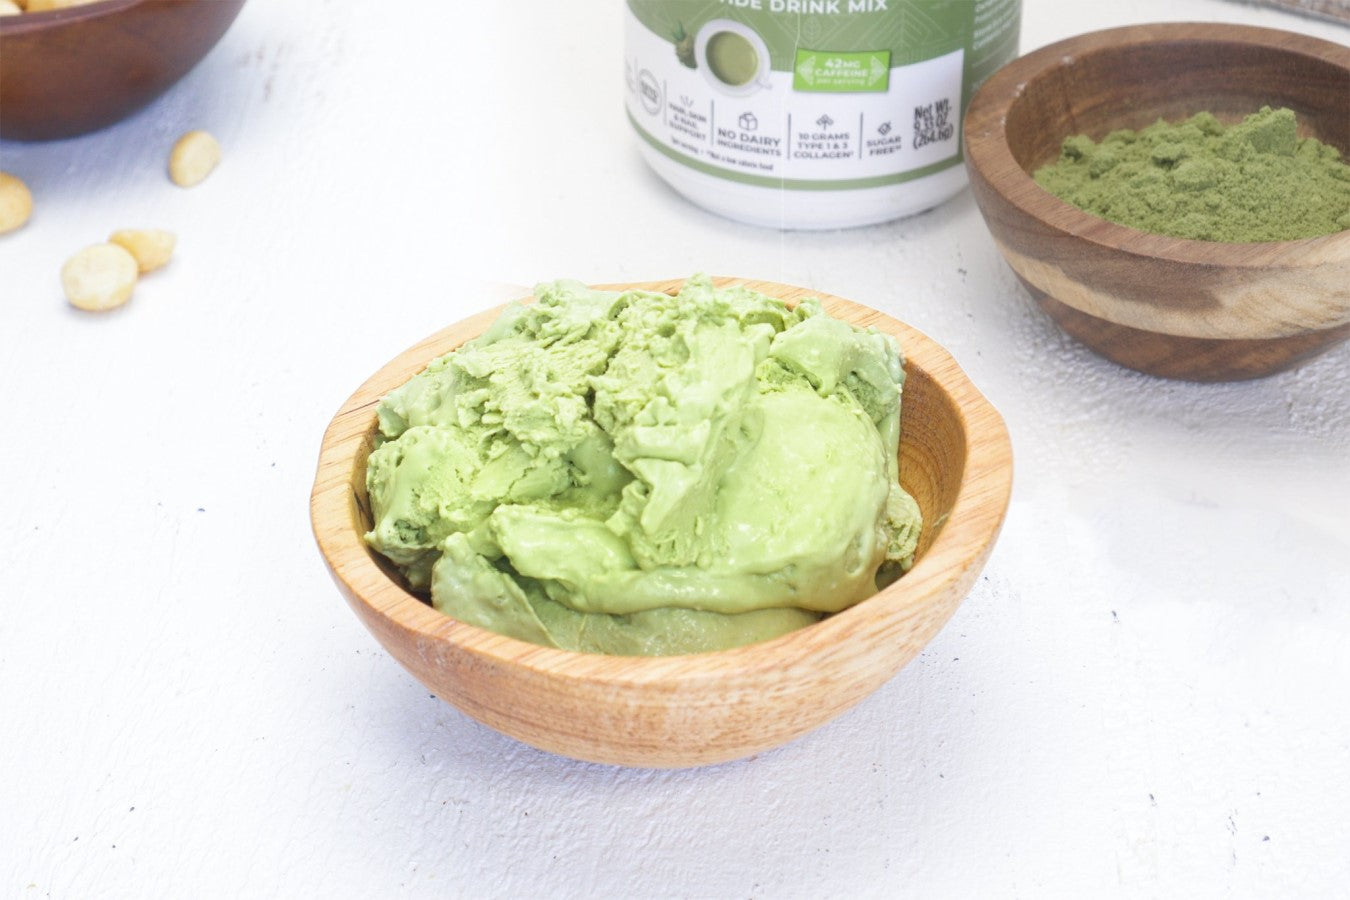 Wooden Bowl Of Green Powder And Wooden Bowl Of Matcha Ice Cream No Dairy Made With Collagen Peptides Powder Recipe Primal Kitchen